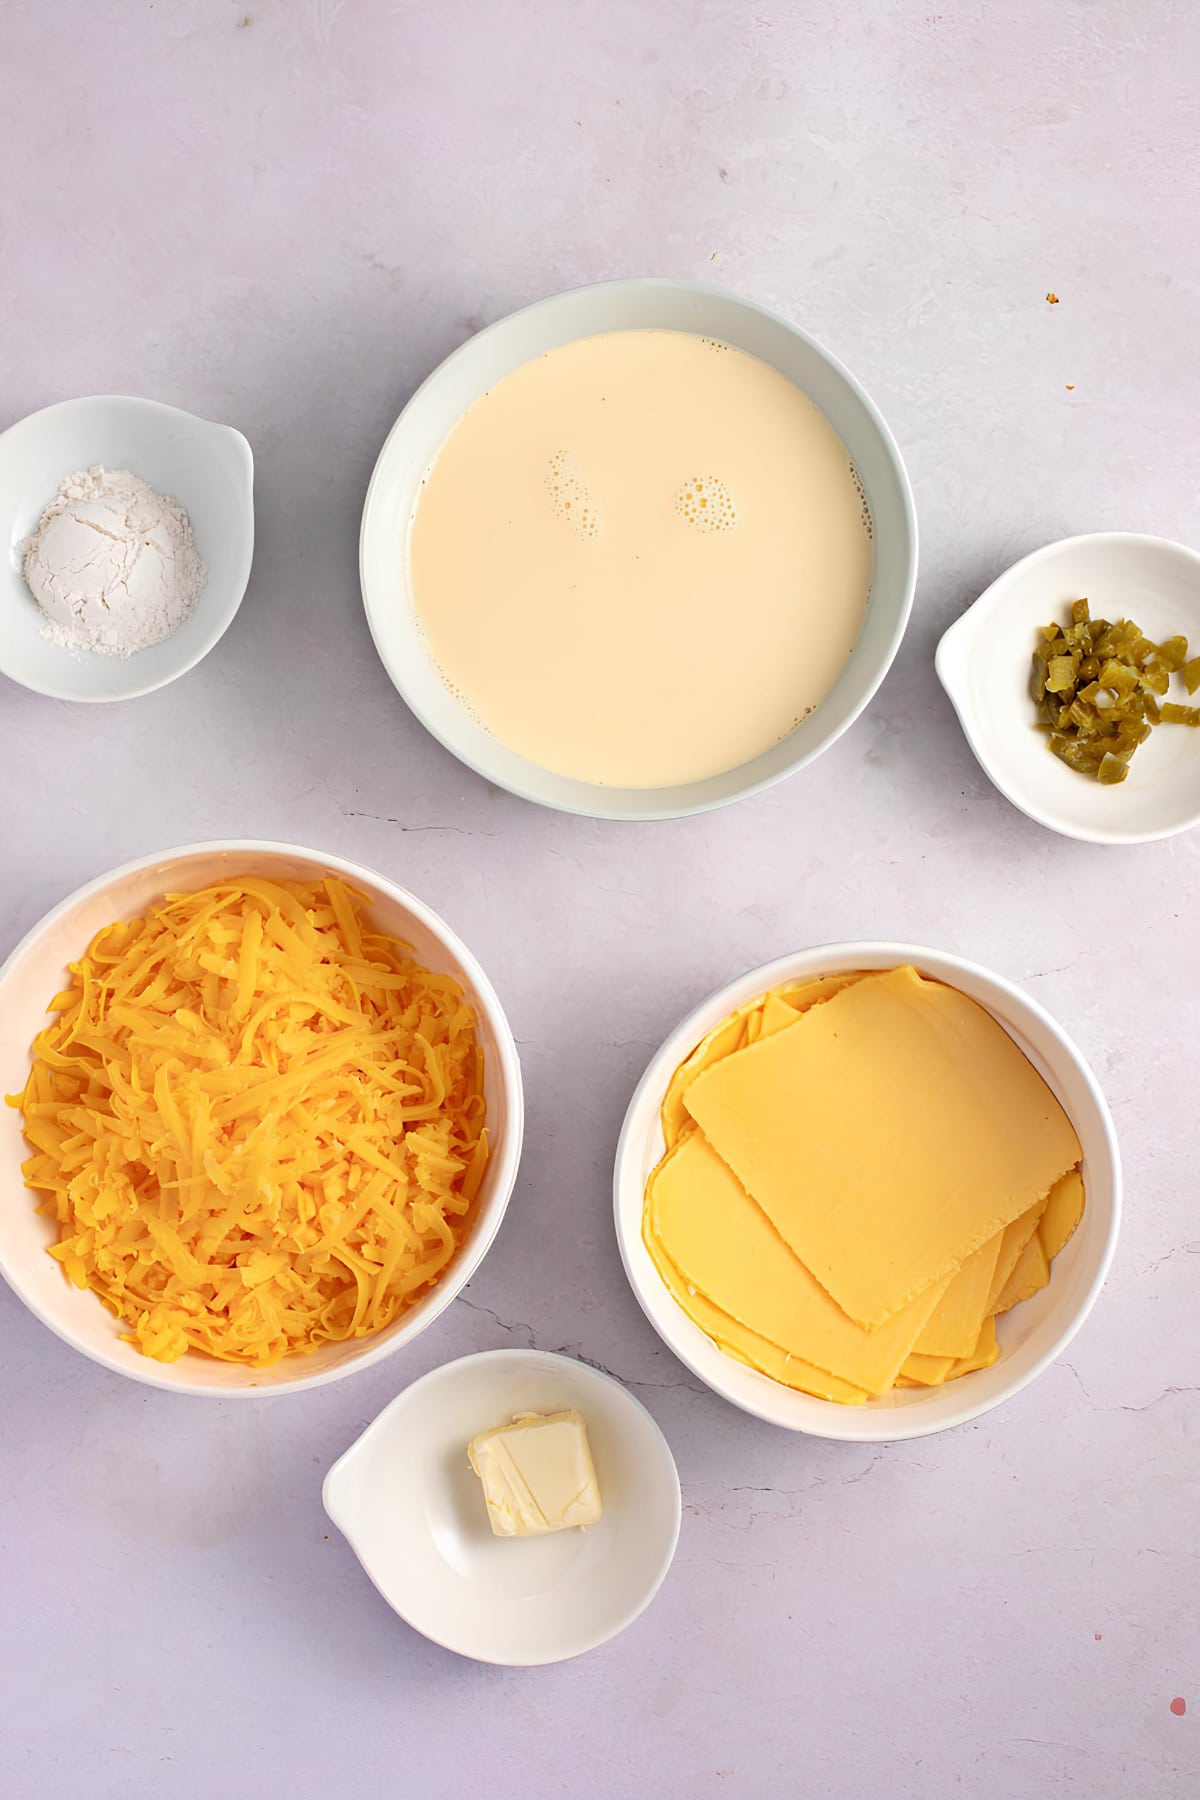 Nacho Cheese Sauce Ingredients: Butter, Flour, Milk, Cheese and Pickled Jalapenos